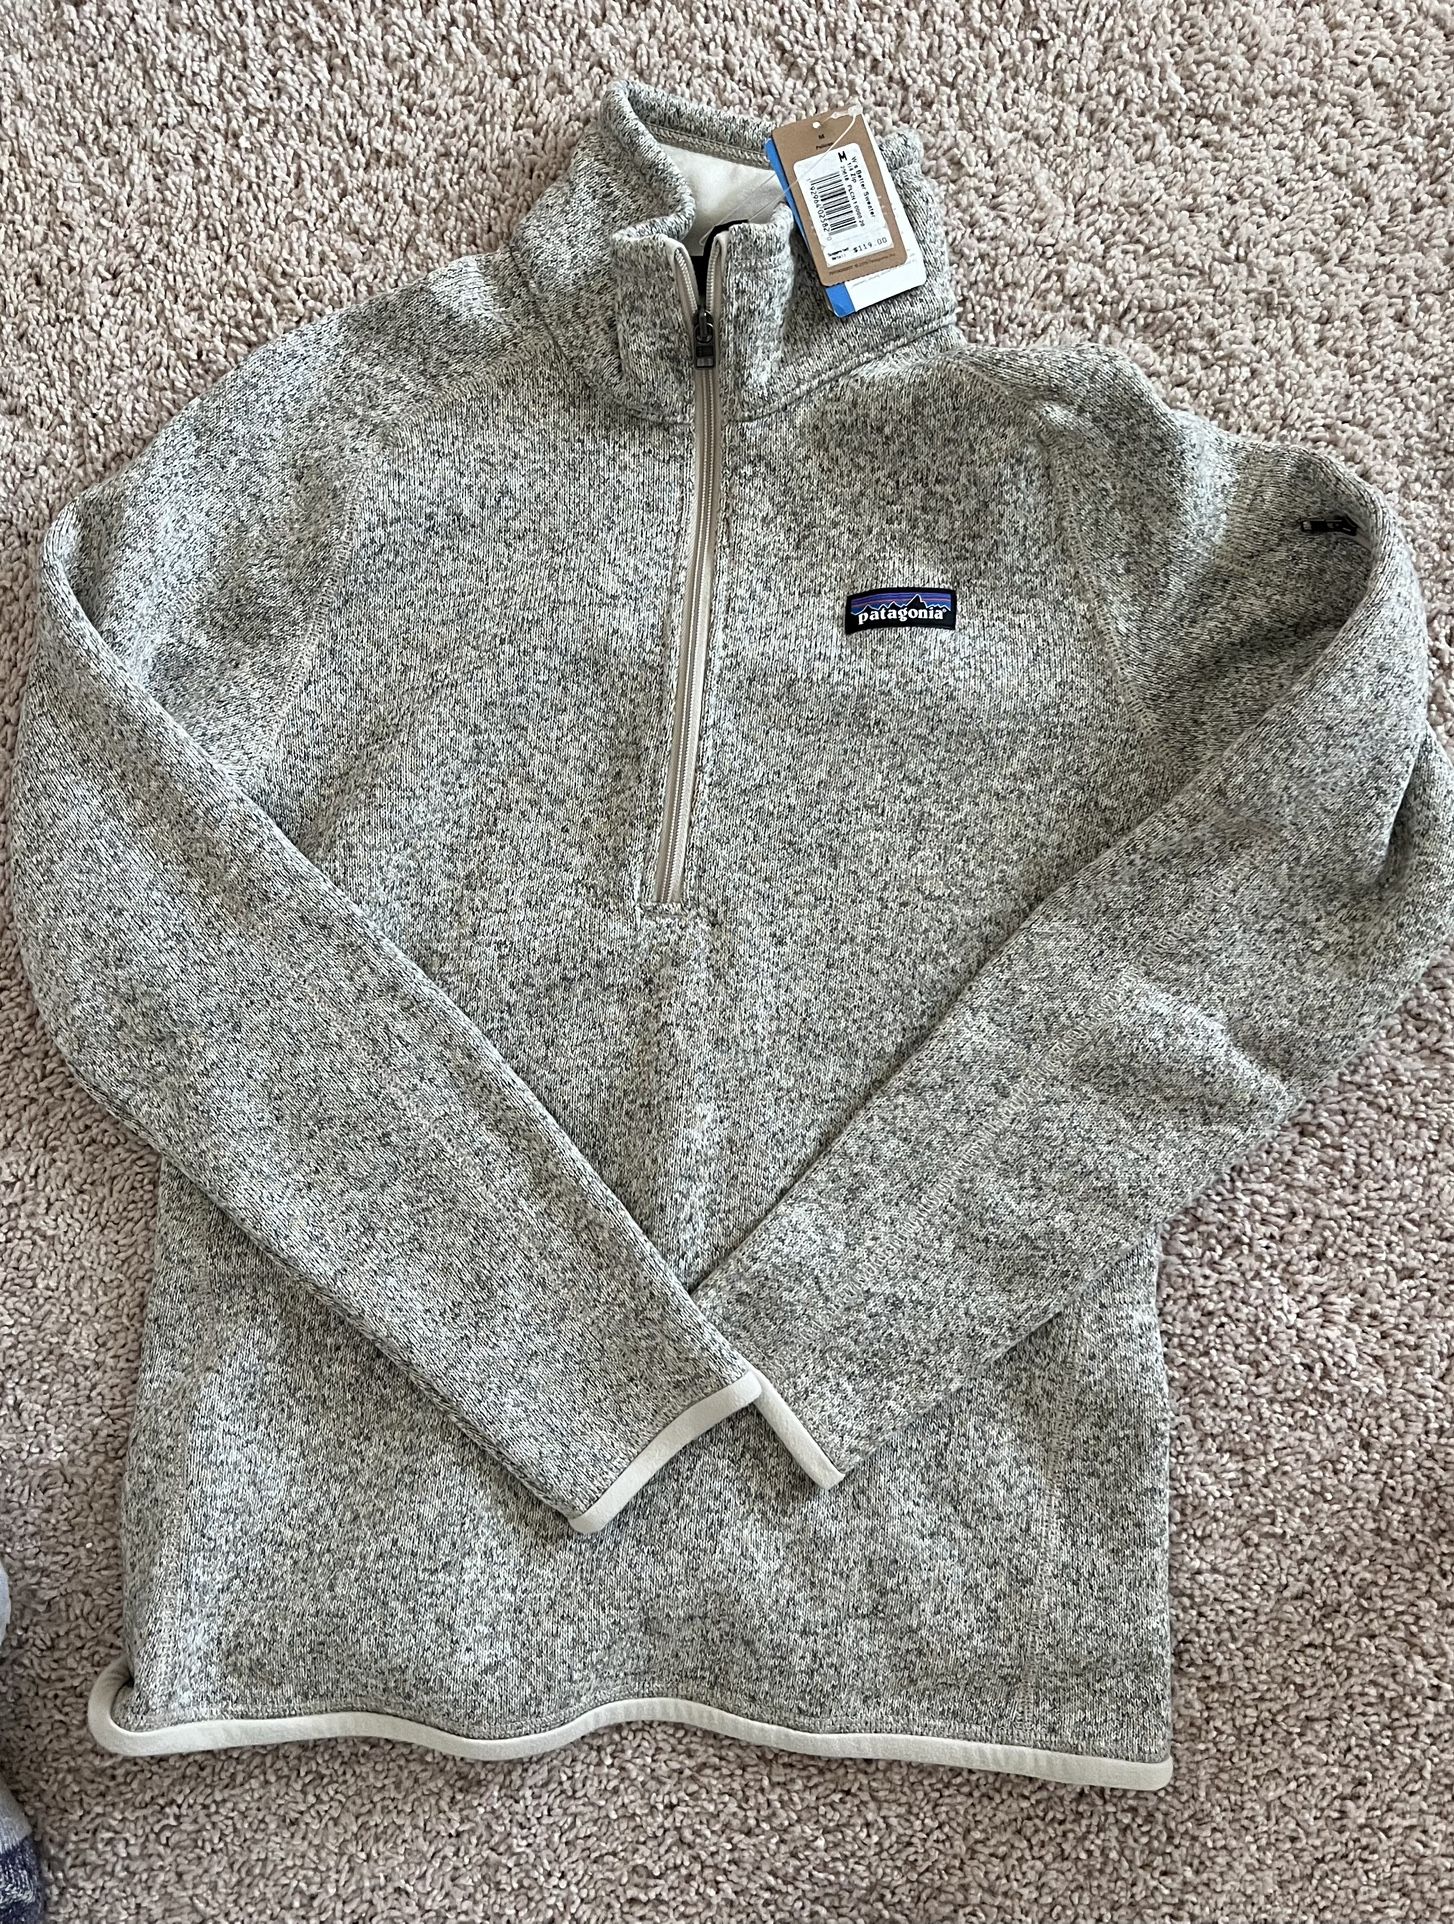 Patagonia Women's Better Sweater 1/4 Zip Pullover new with tags that say $119.00 